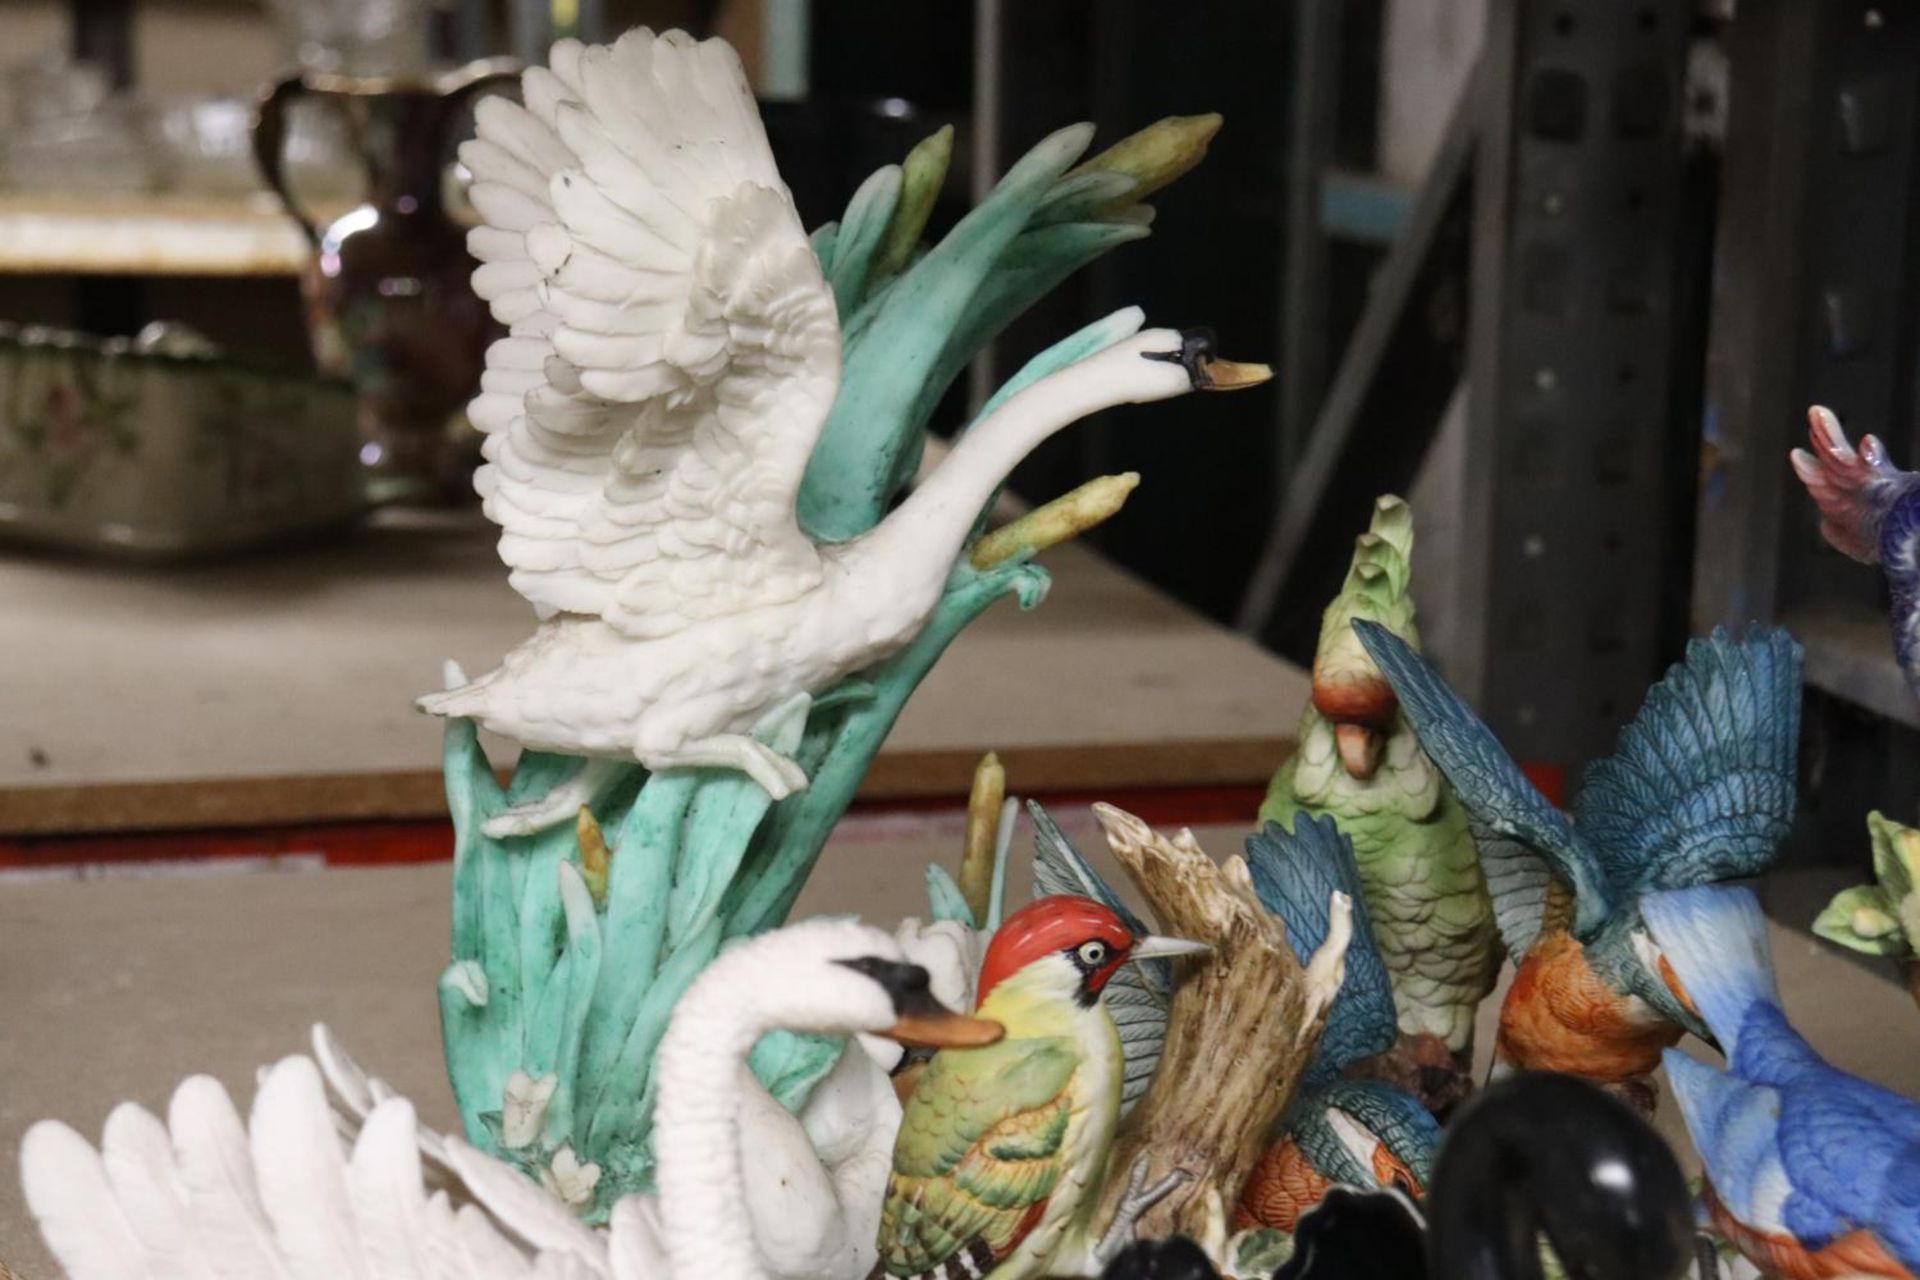 A COLLECTION OF BIRD FIGURINES TO INCLUDE SWANS, A PARROT, WOODPECKER, ETC - Image 5 of 6